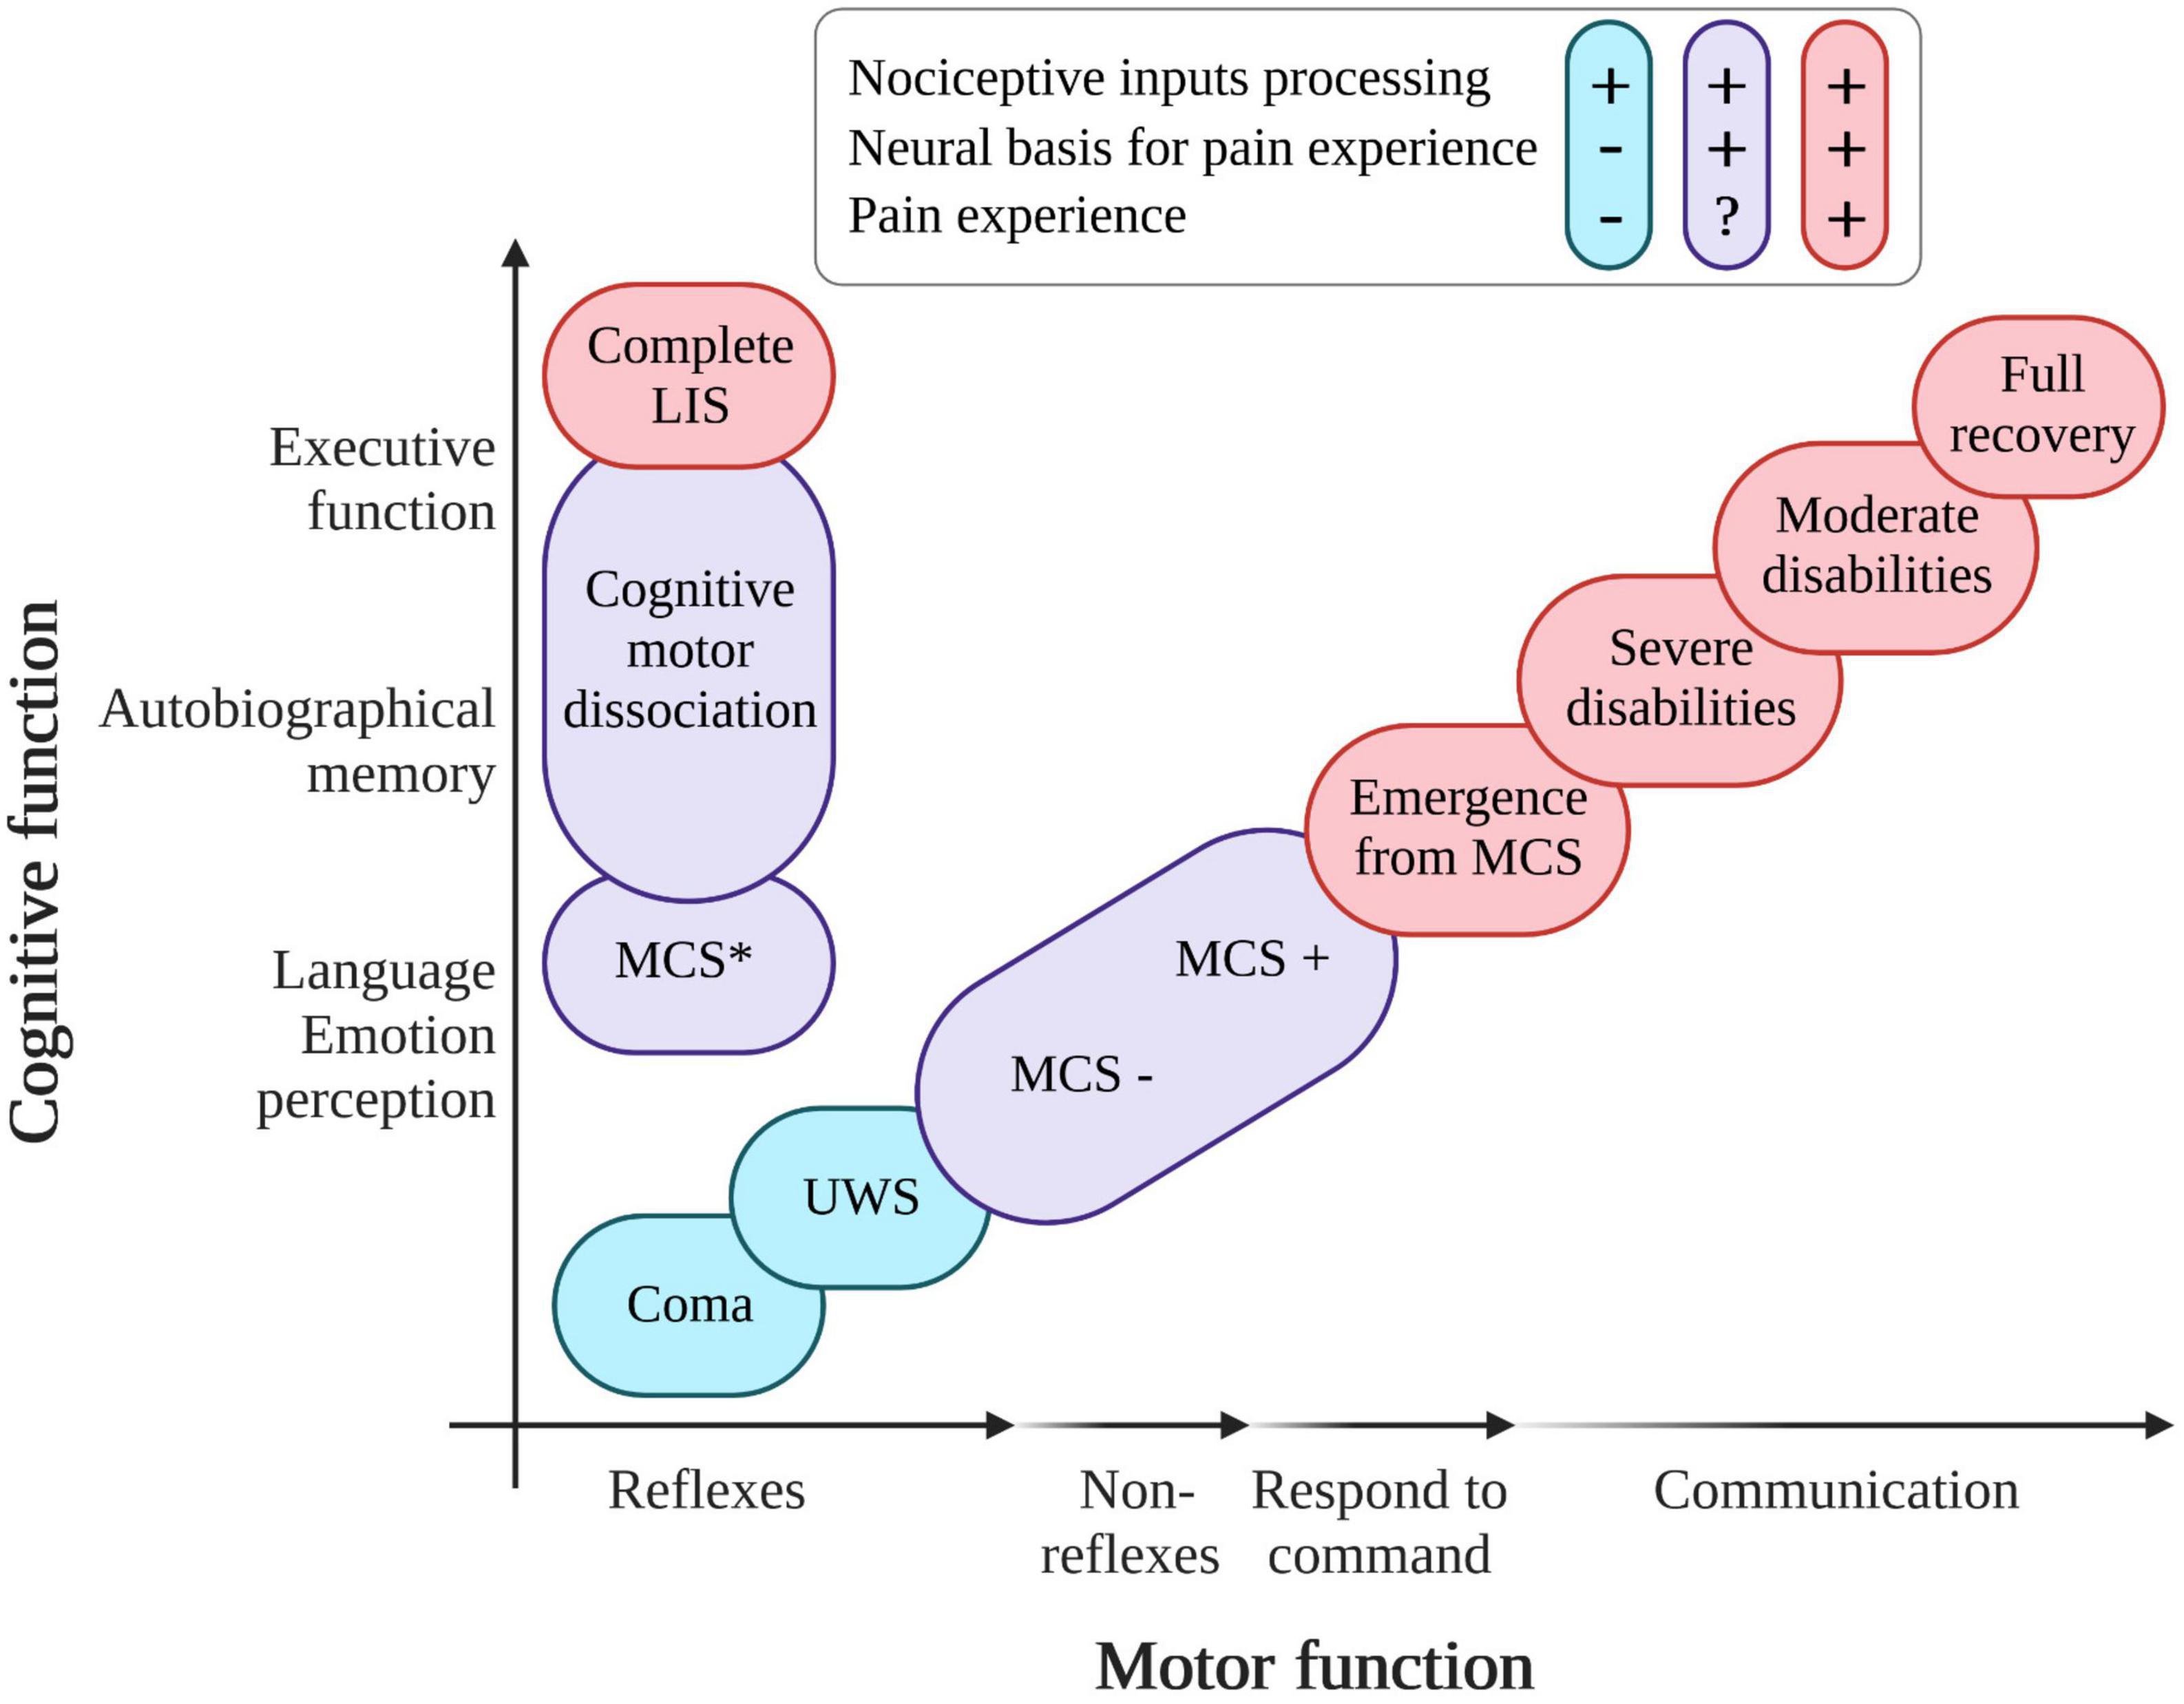 Frontiers Assessment and management of pain/nociception in patients with disorders of consciousness or locked-in syndrome A narrative review pic